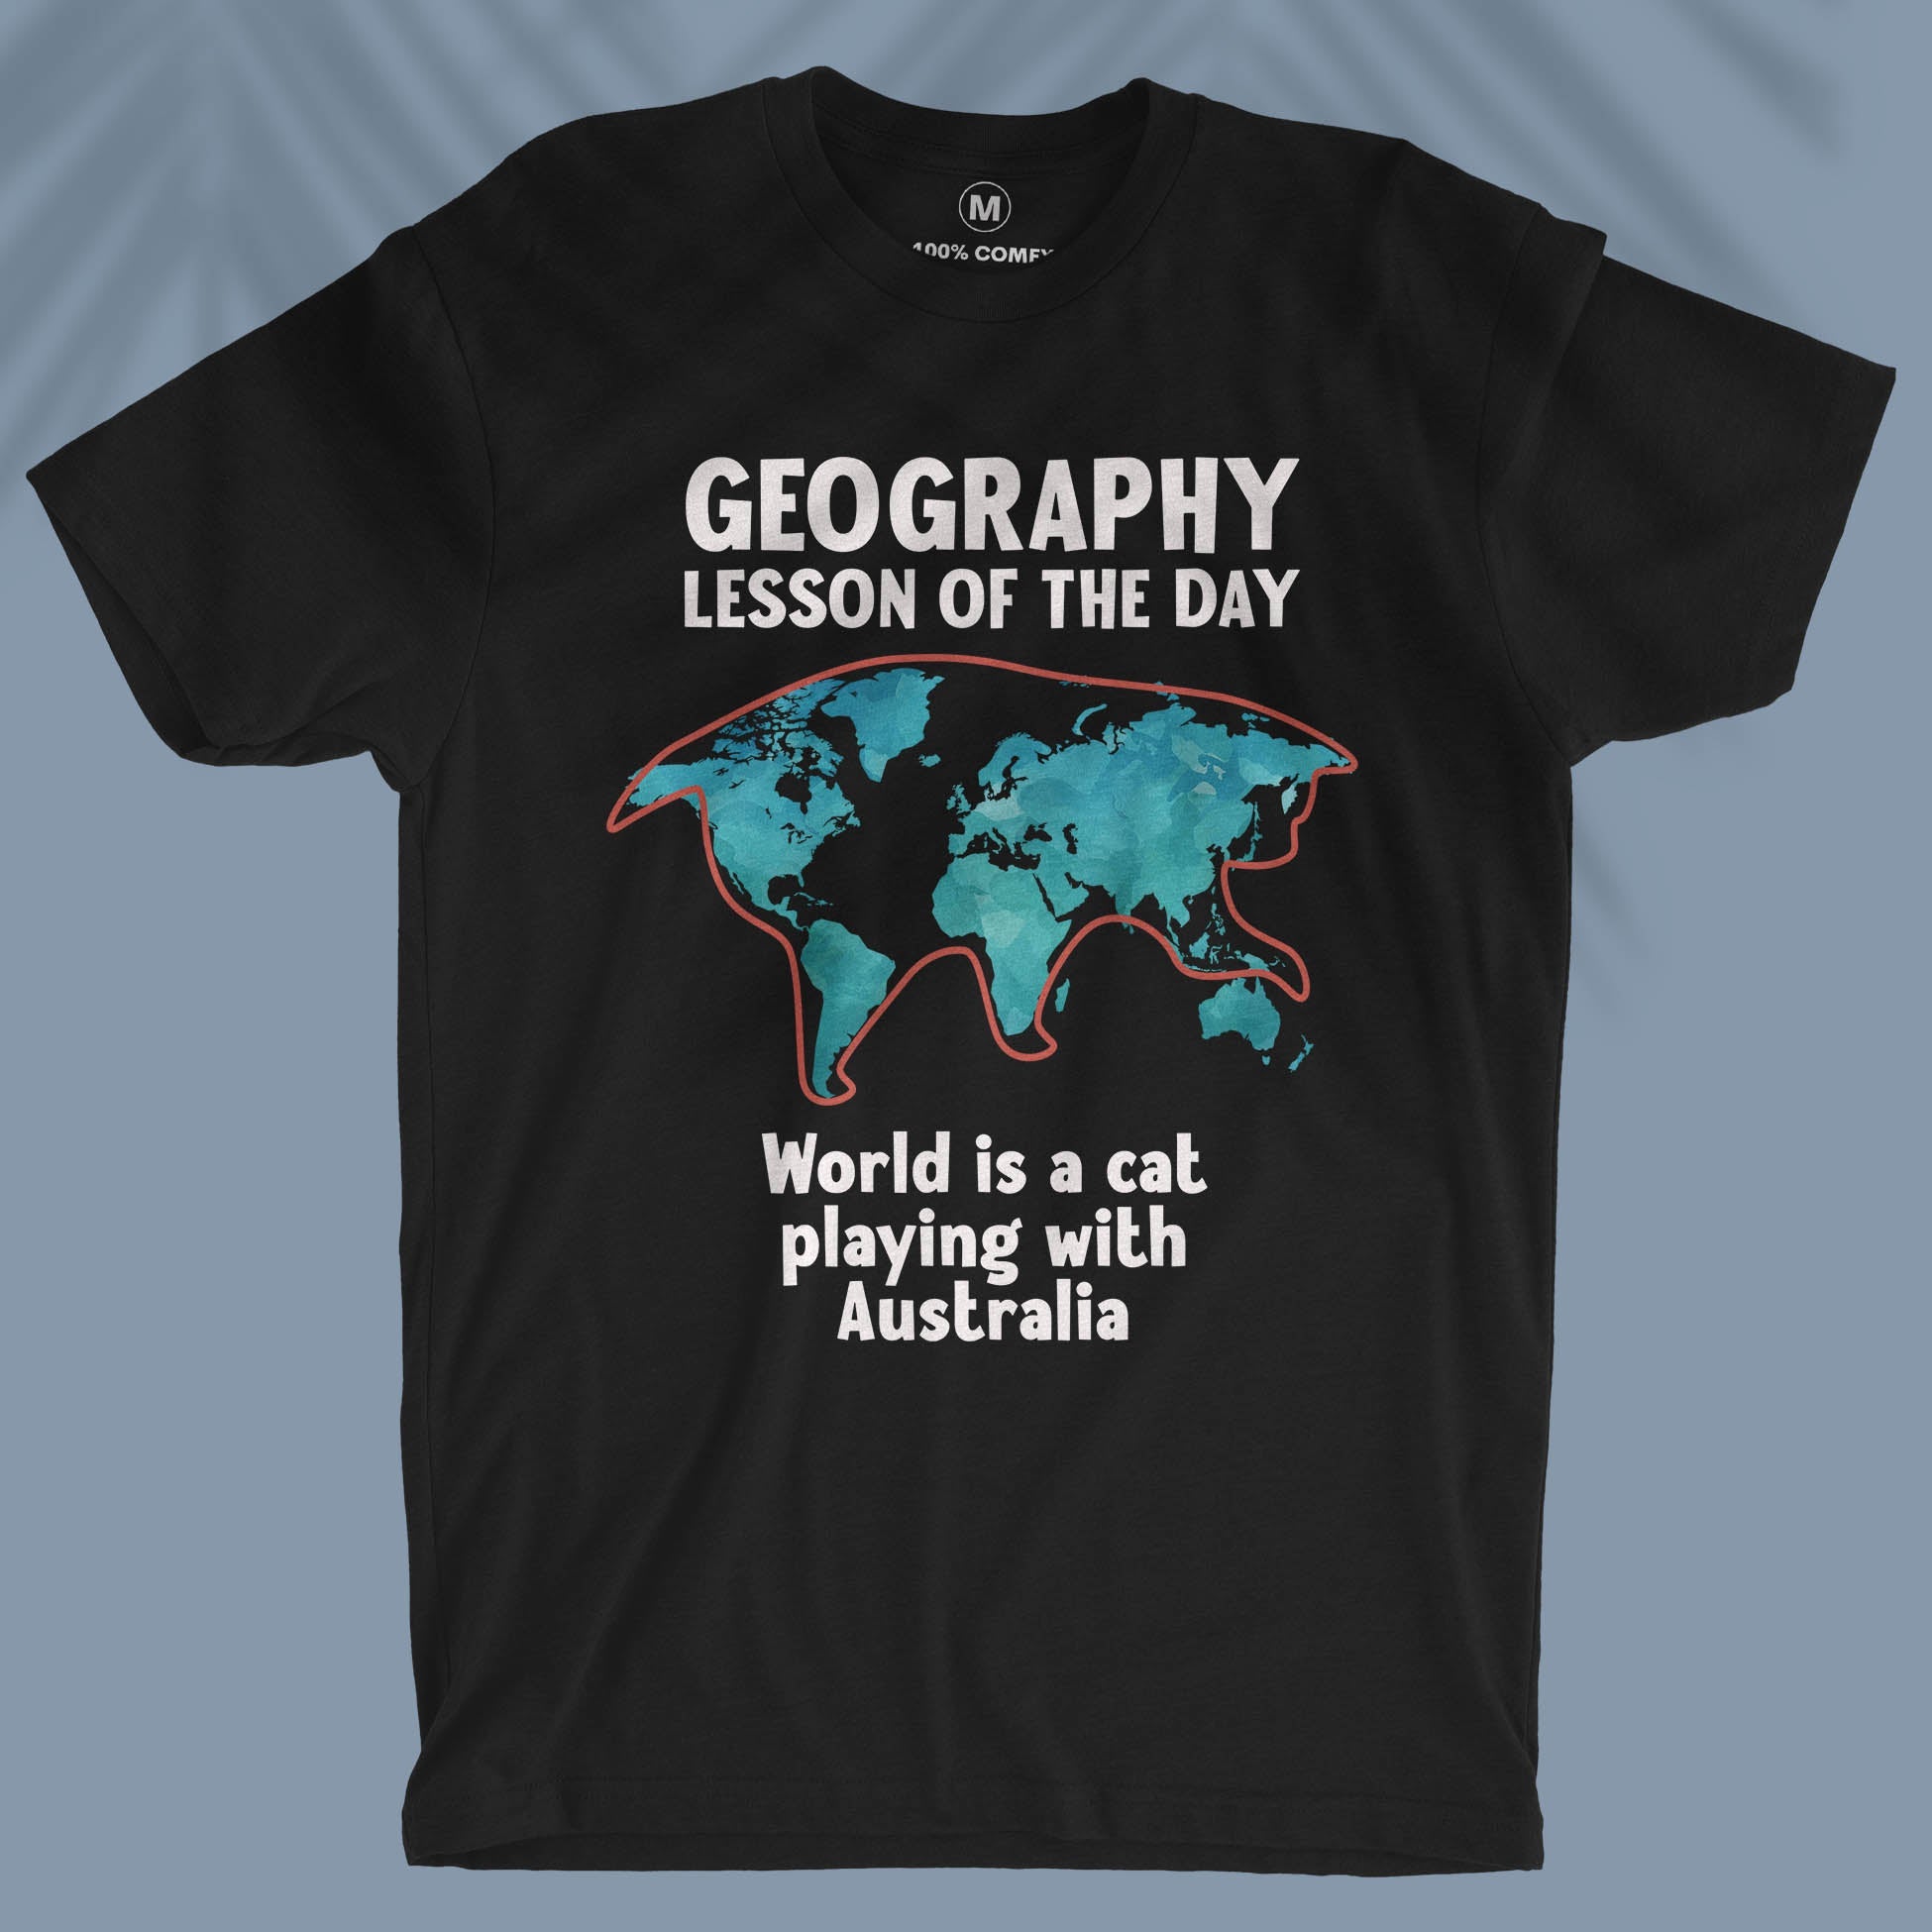 World Is A Cat Playing With Australia  - Unisex T-shirt For Geography Teachers And Learners